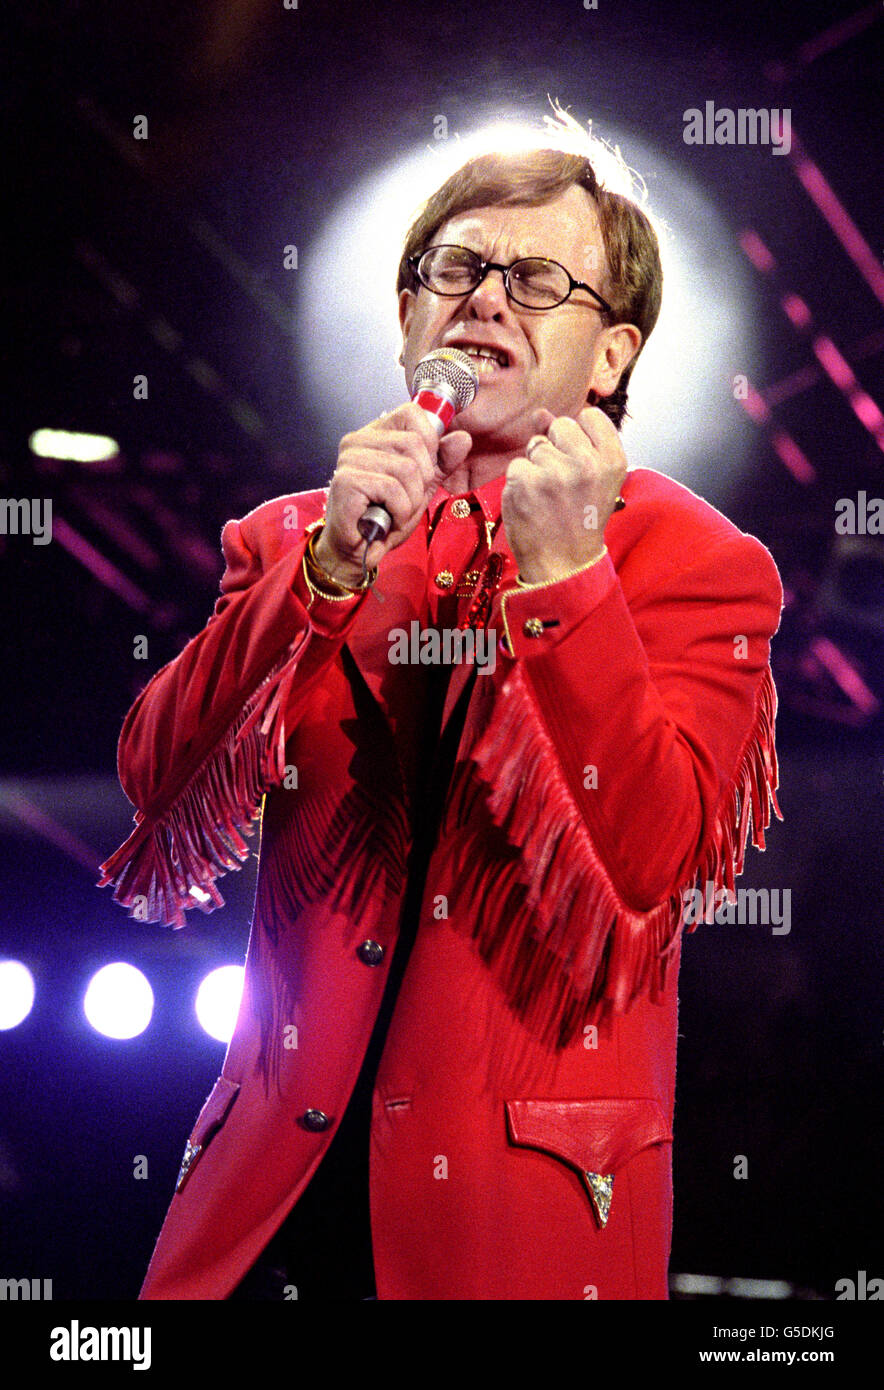 Singer and pianist Elton John performing during the Freddie Mercury Tribute Concert at Wembley, London. Stock Photo